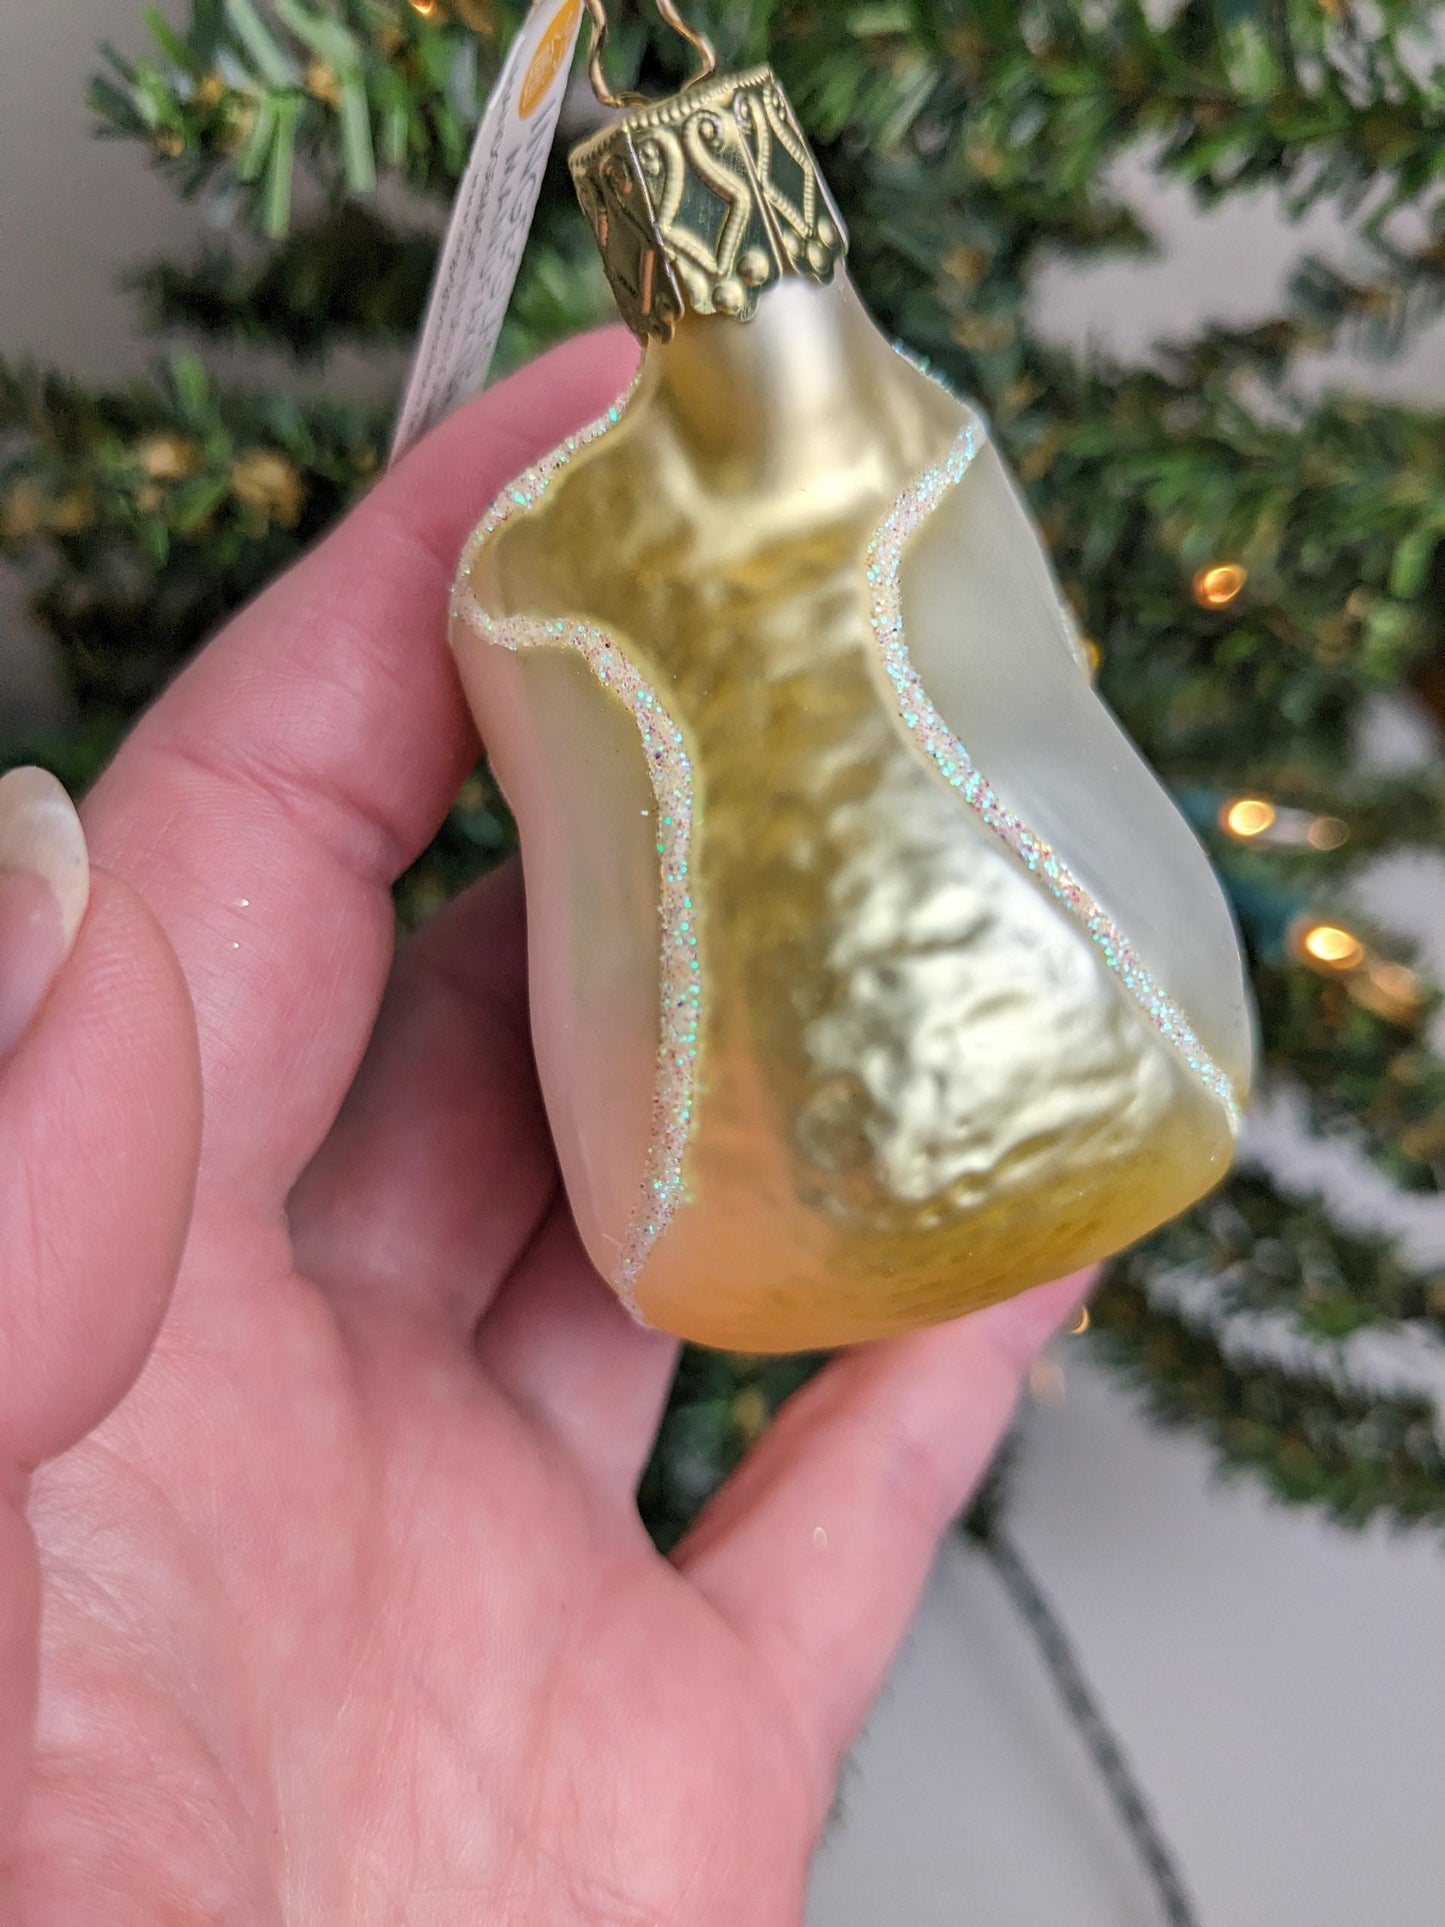 NEW 'My First Shoe' Baby Shoe Inge Glas Christmas Ornament